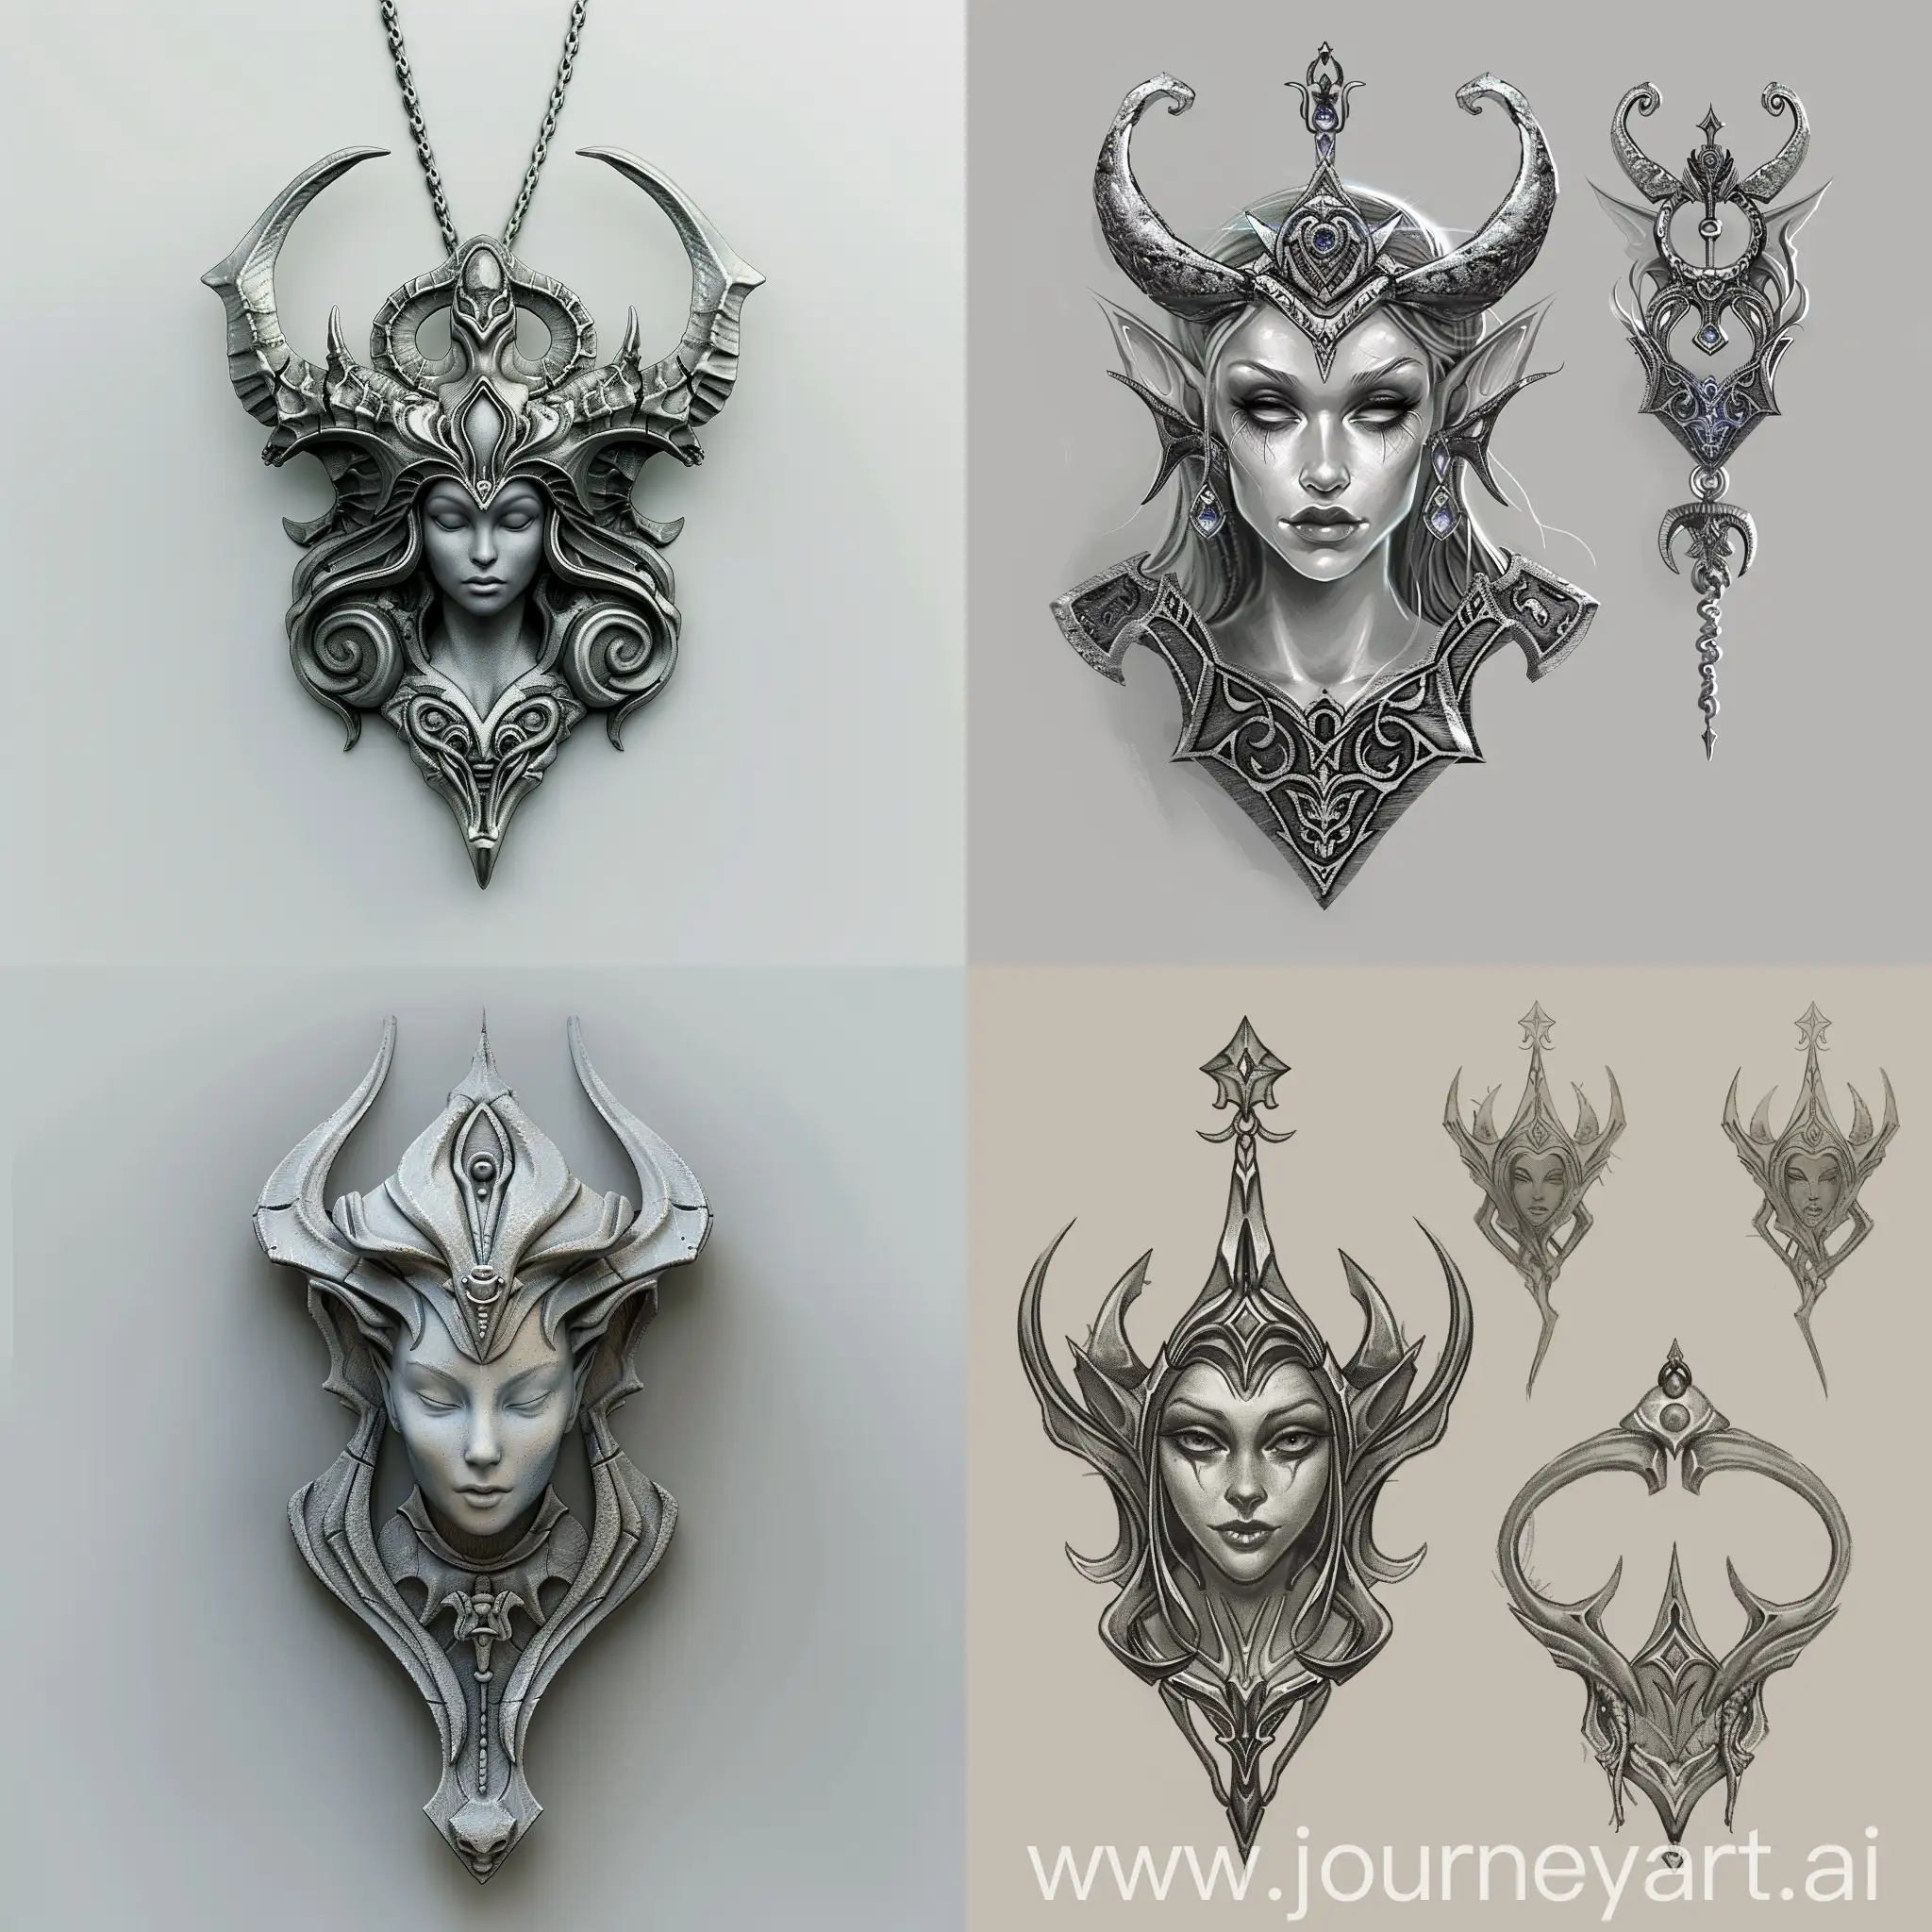 Jewelry concept art. Amulet goddess Drow. A symbol of her veneration and worship. Image is sinister and in light gray tones